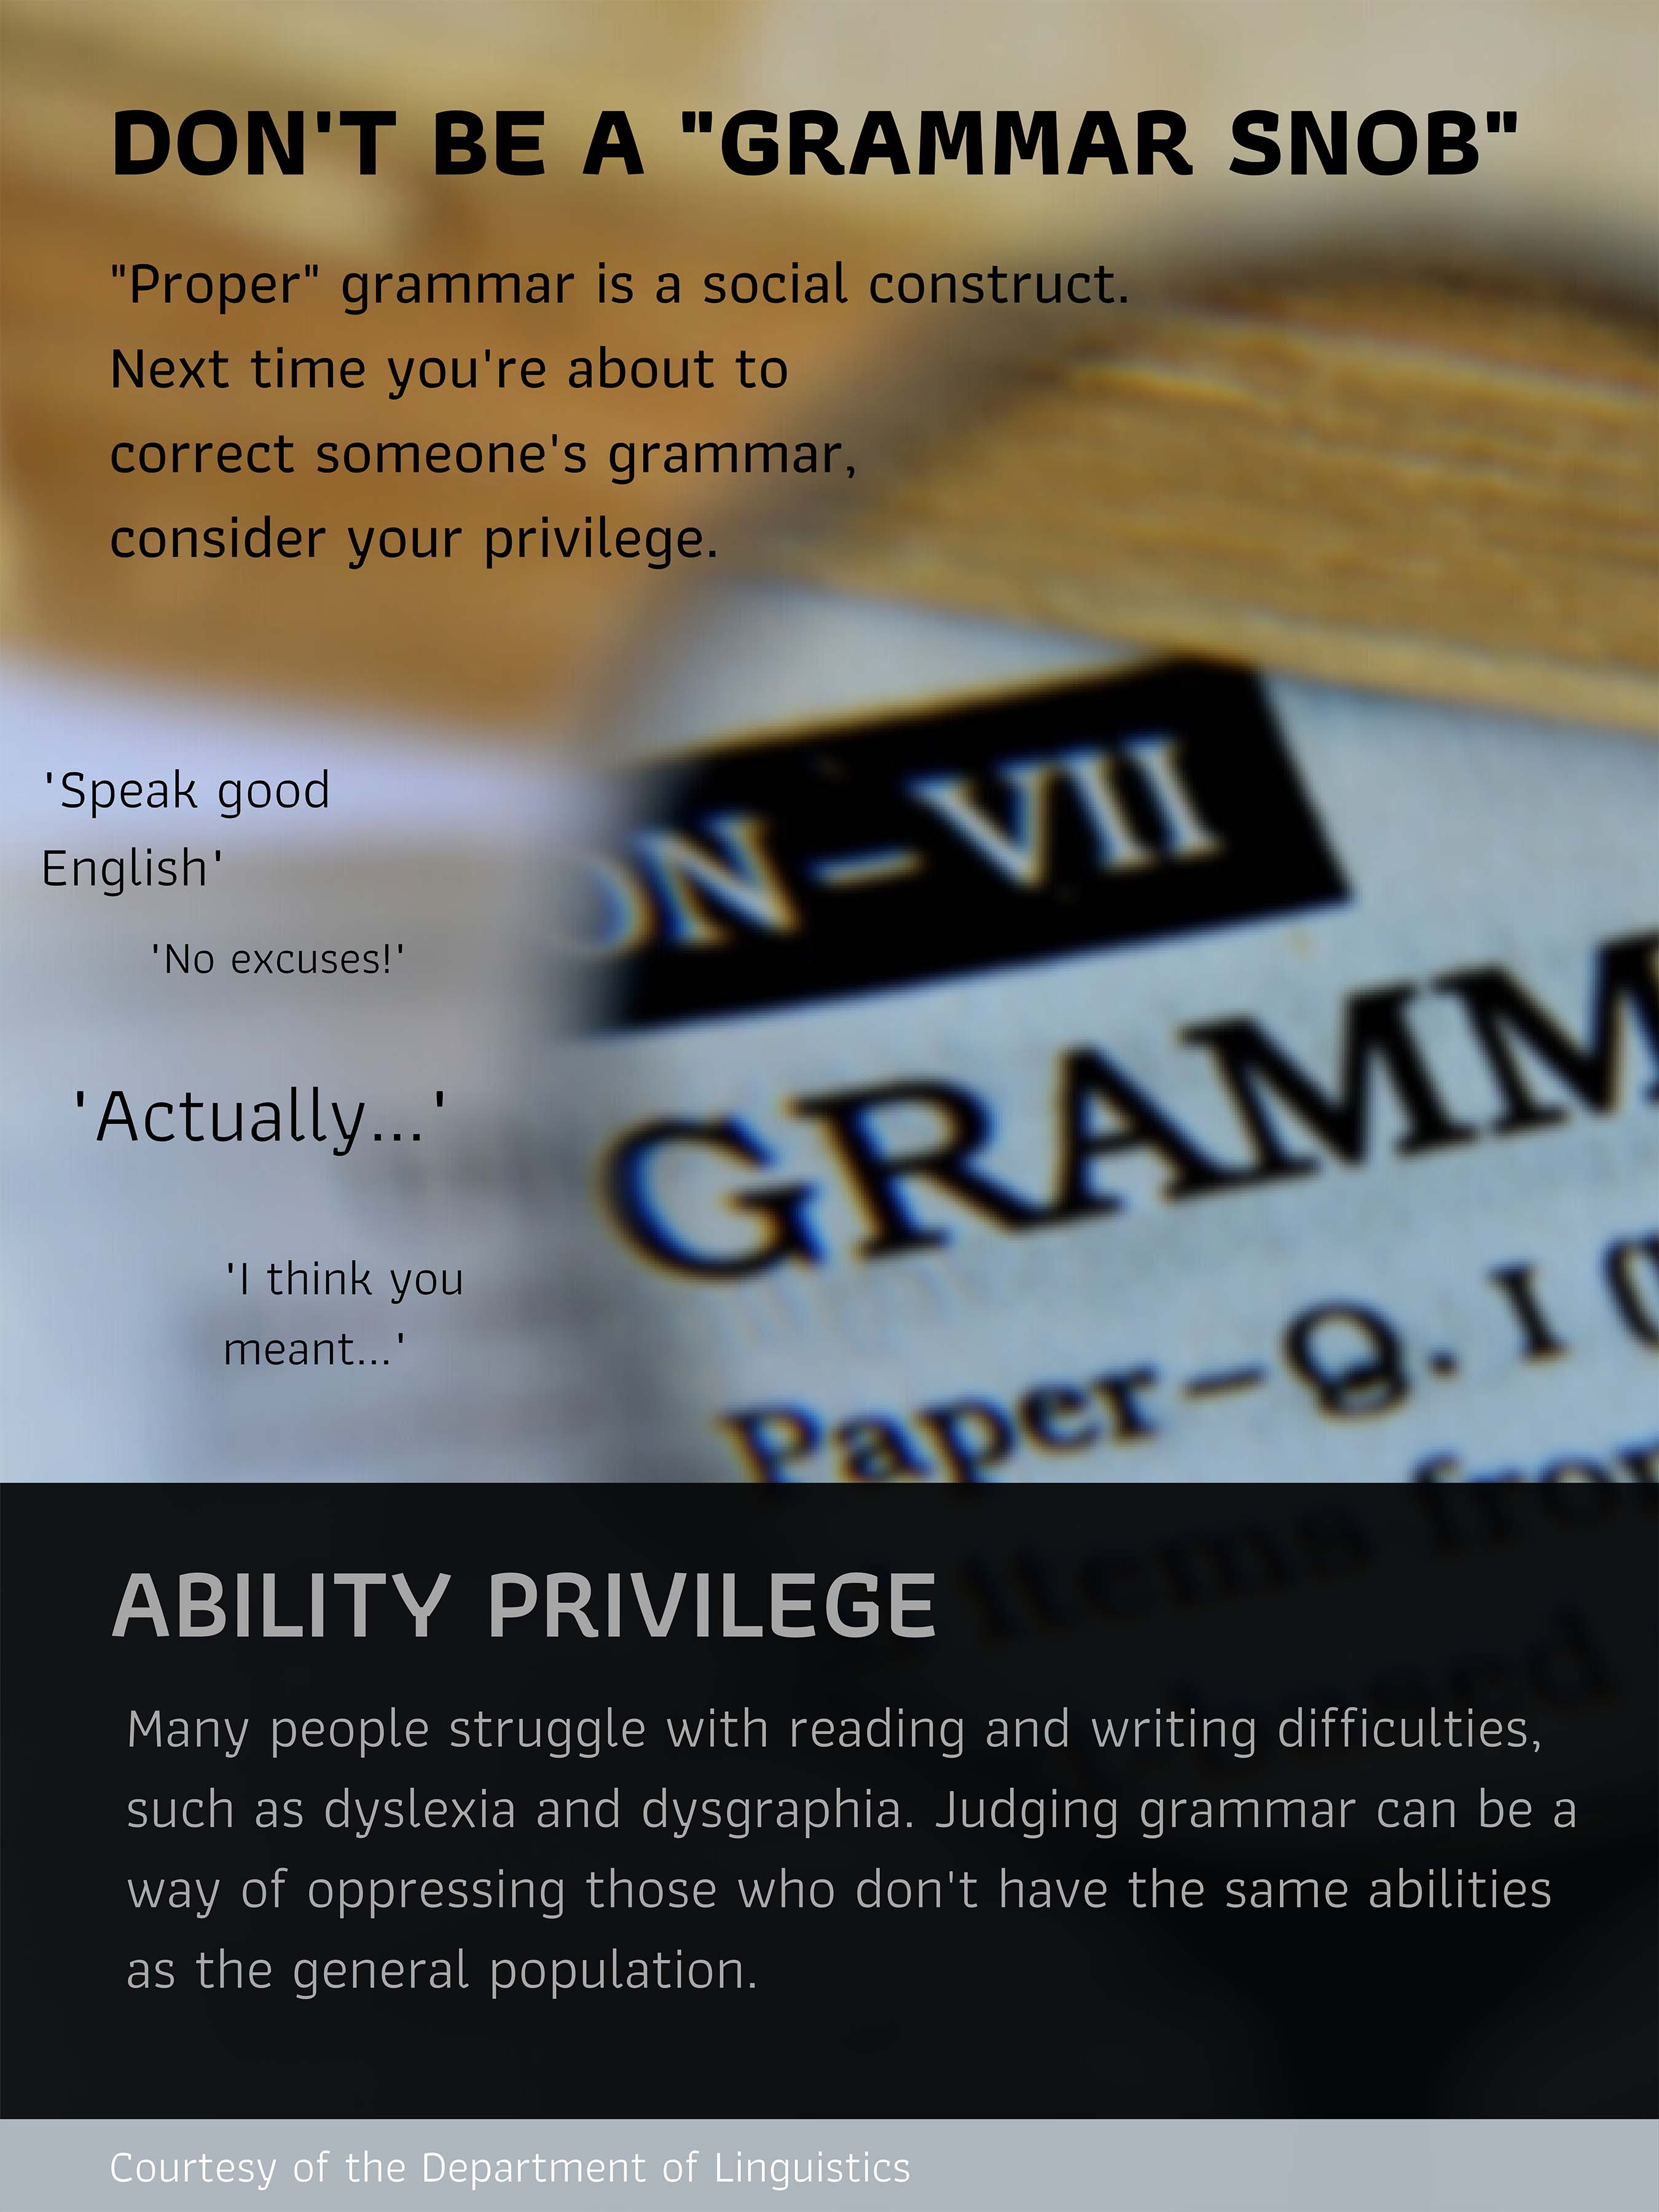 Don't be a grammar snob. Consider your ability privilege. Click on image to see full description.